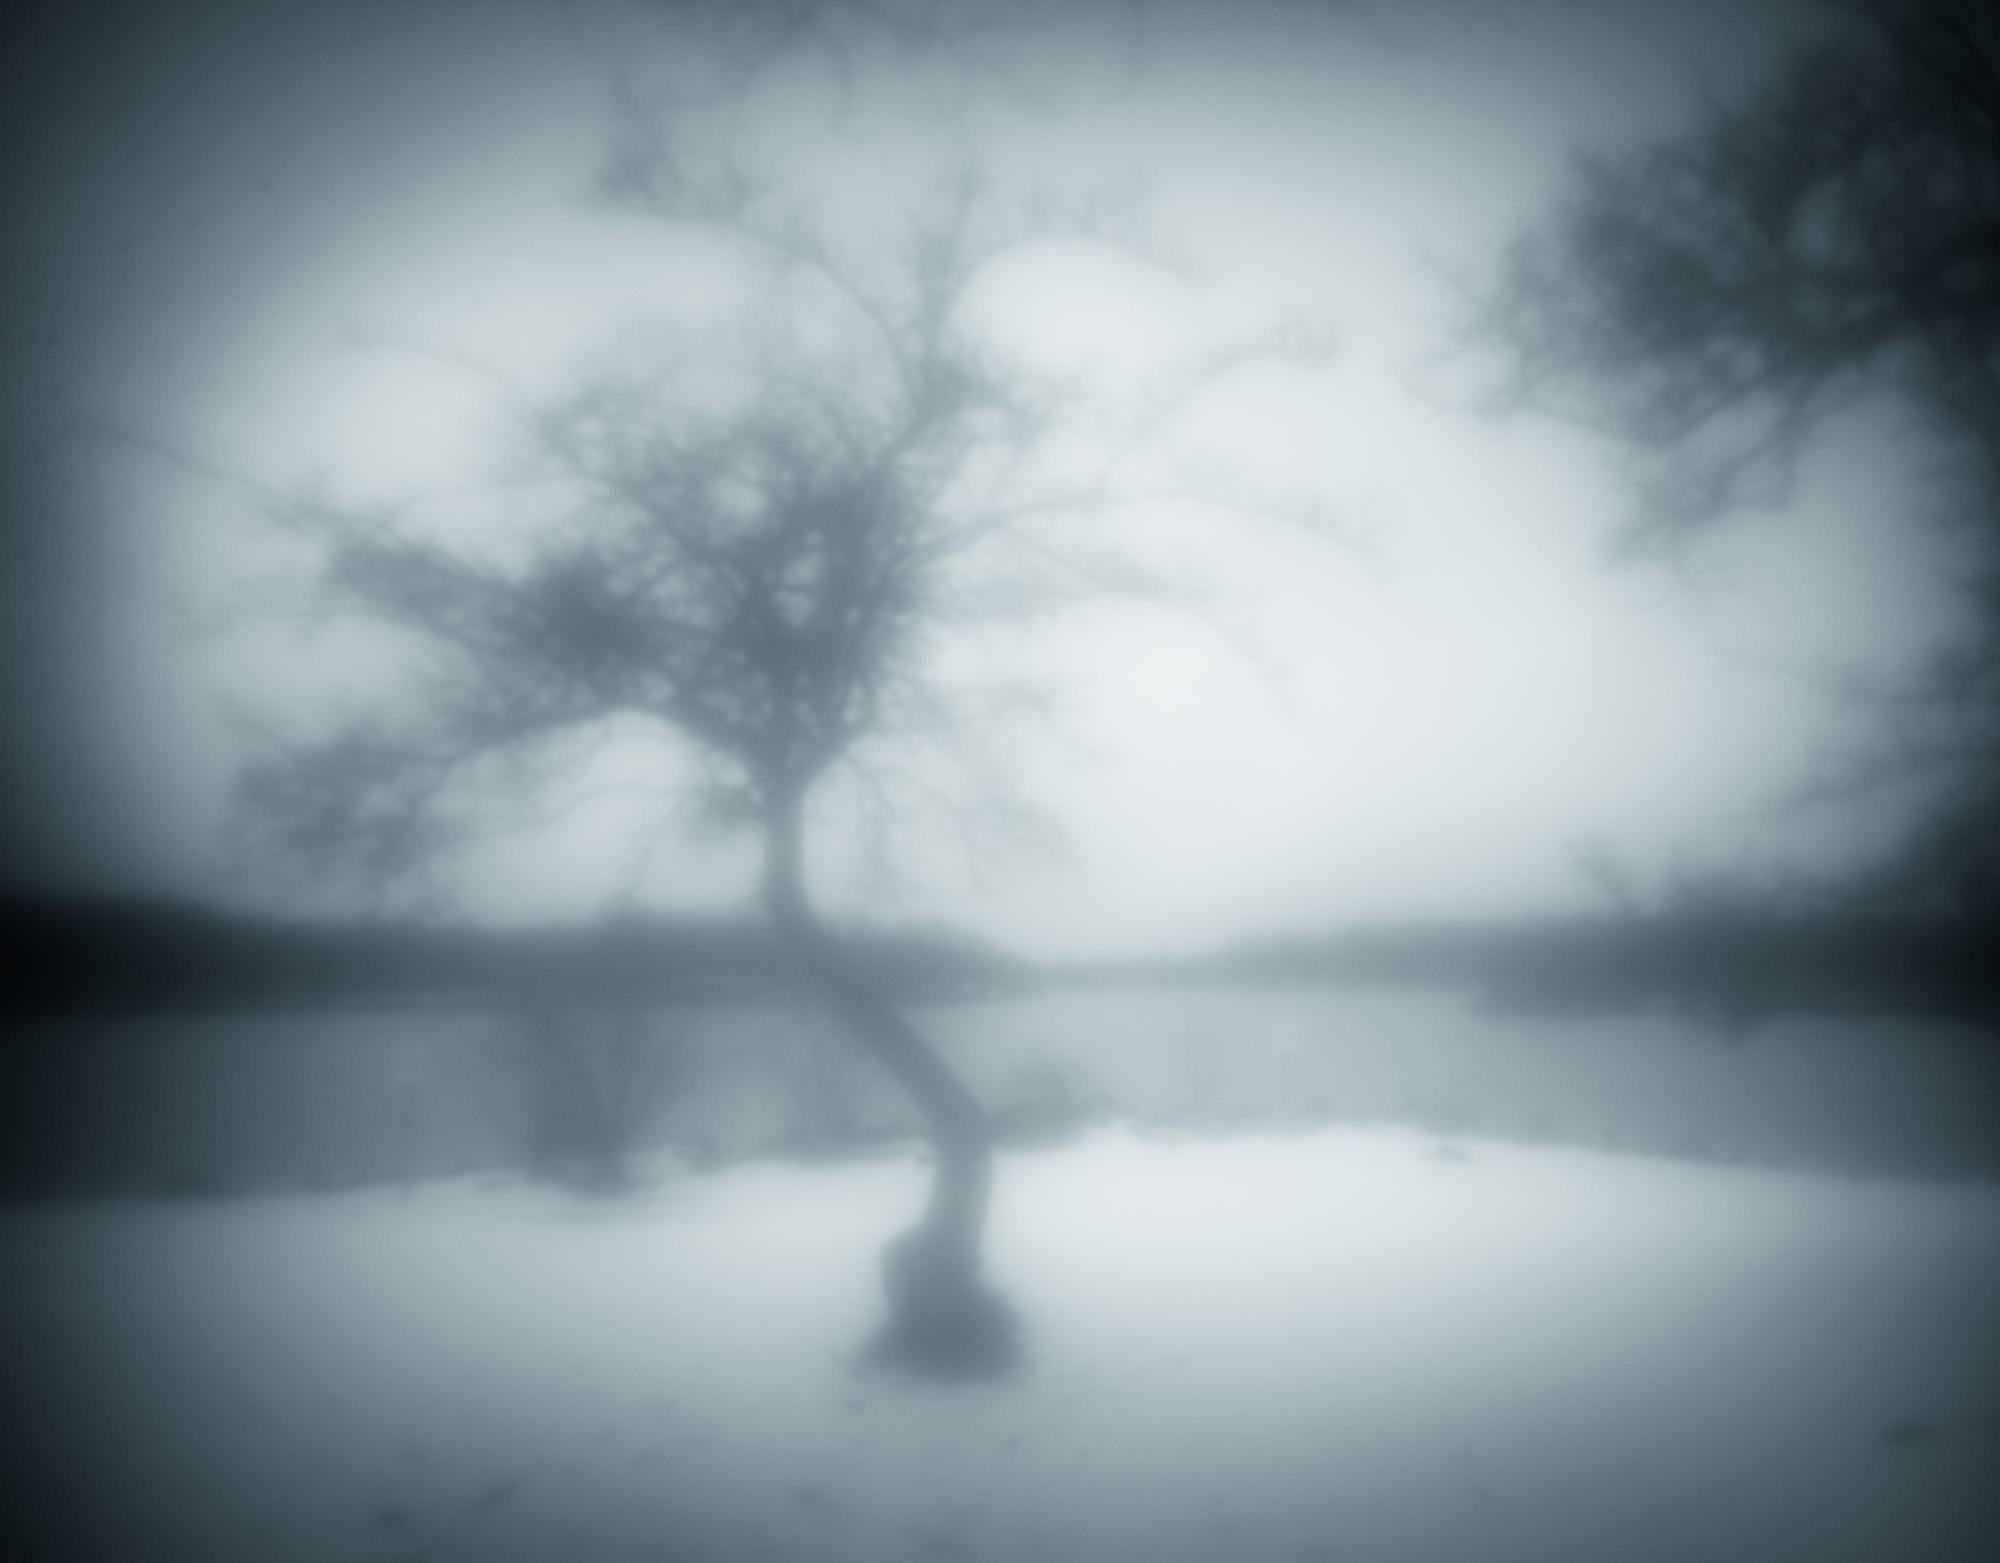 Limited edition black and white cool tone photograph on archival pigment print. A dreamy ethereal photograph made in the winter of 2021 on the edge of a frozen lake. "One Winter Tree" was taken using a little known in camera technique; an experiment